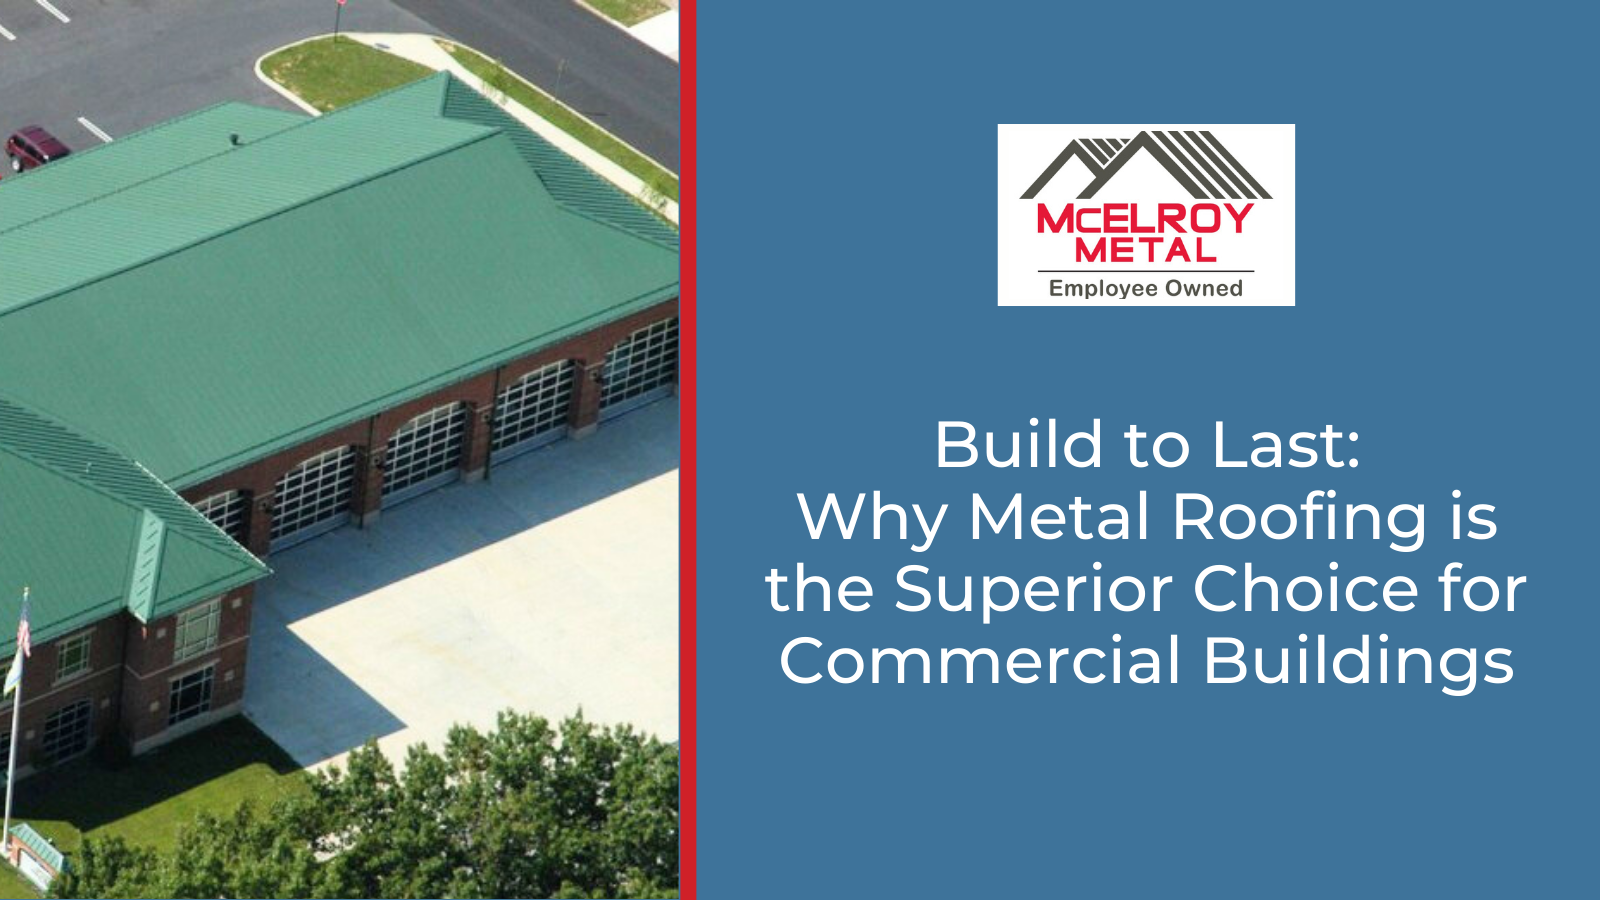 Build to Last: Why Metal Roofing is the Superior Choice for Commercial Buildings